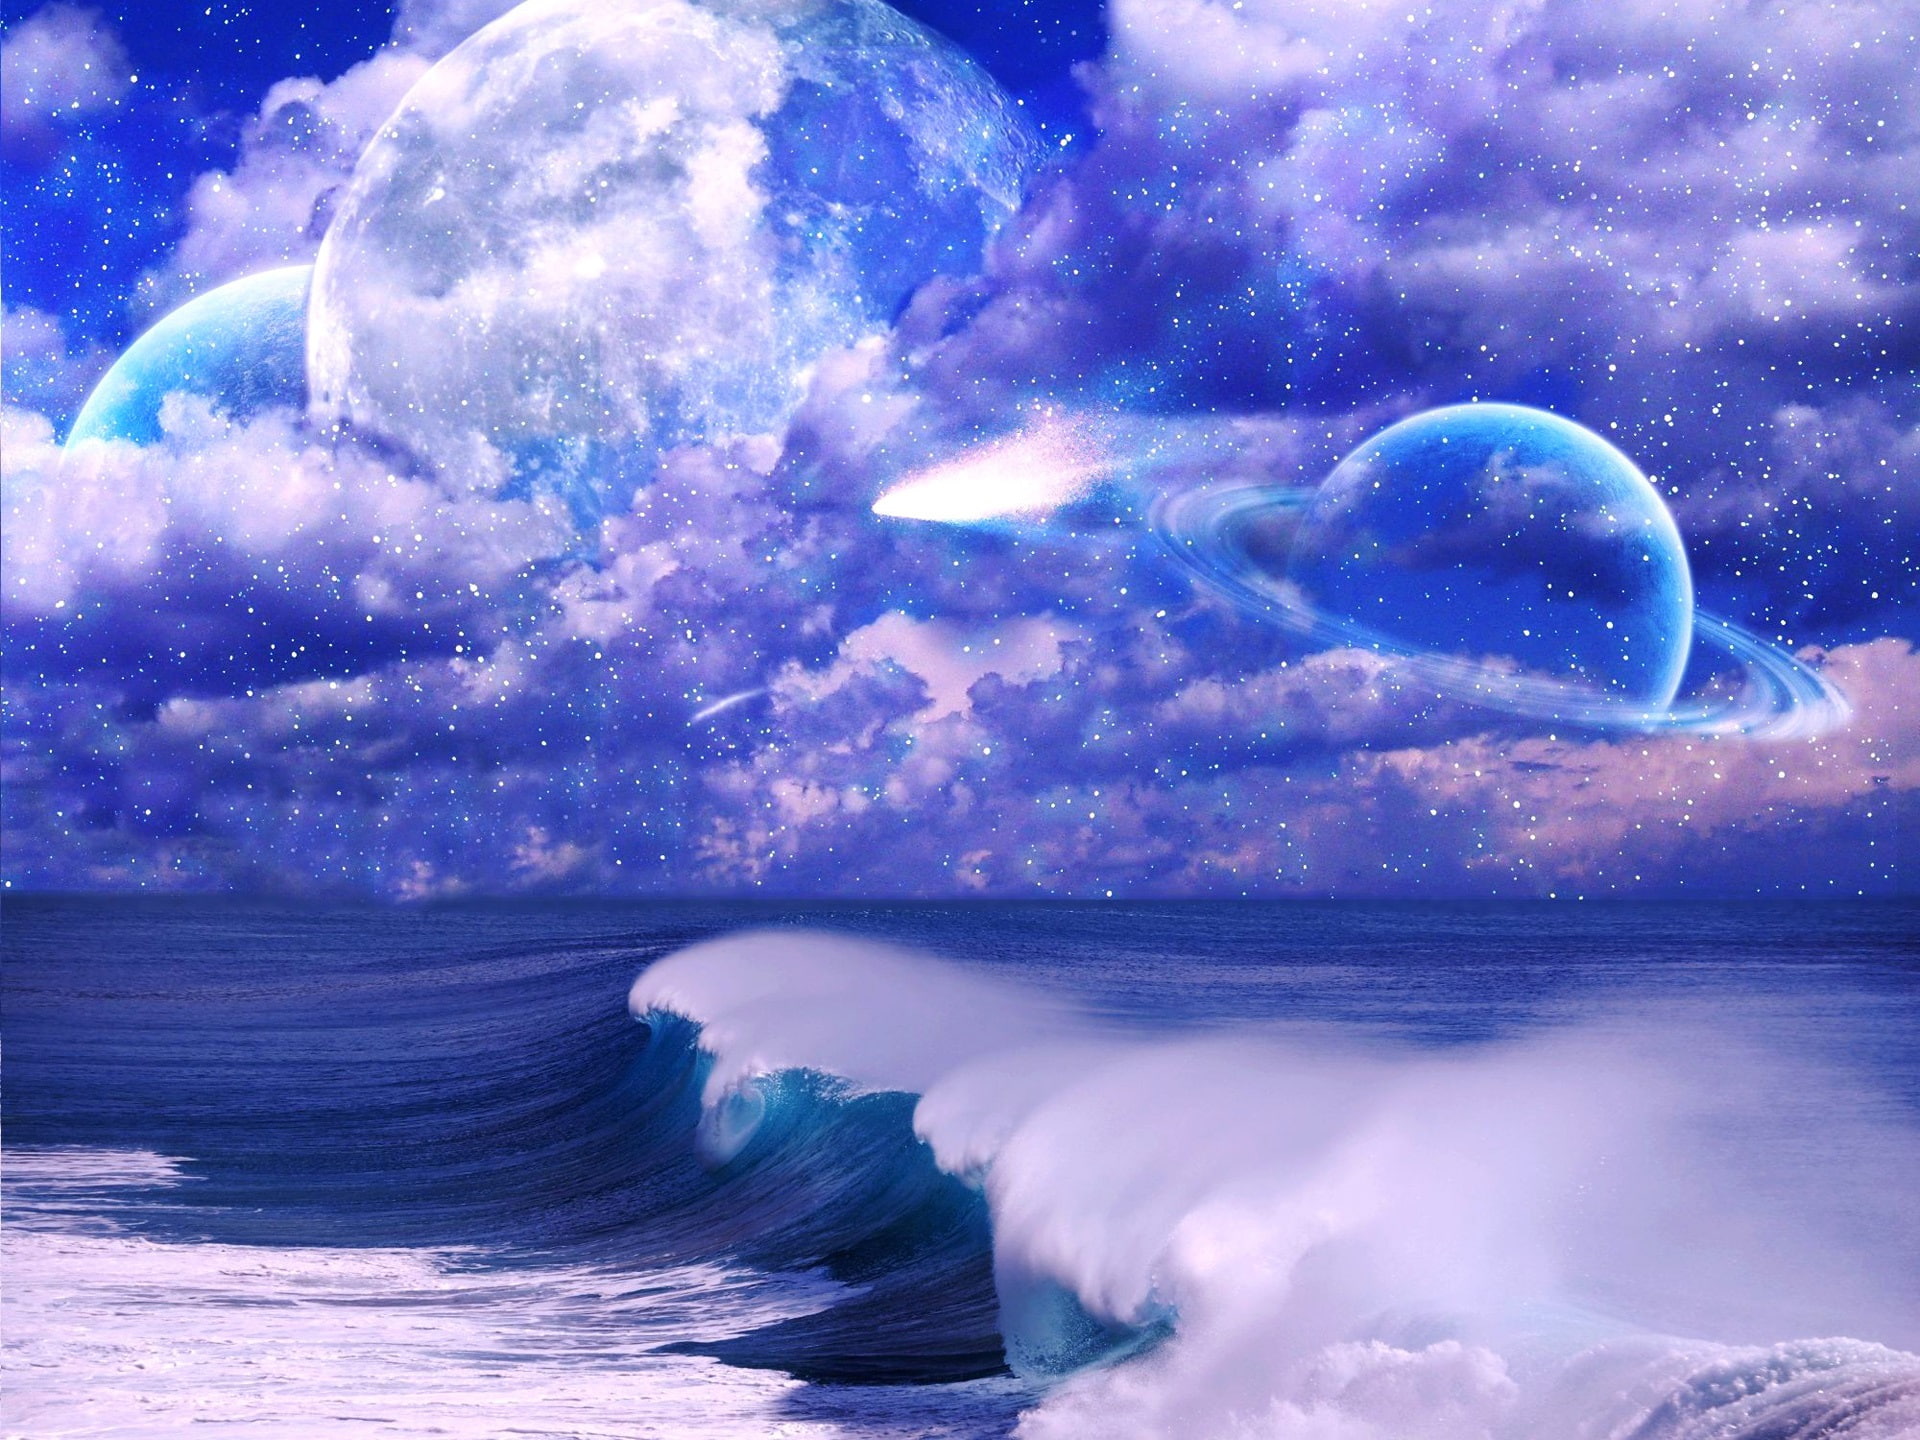 Art pictures, space, sky, clouds, stars, planet, sea, waves